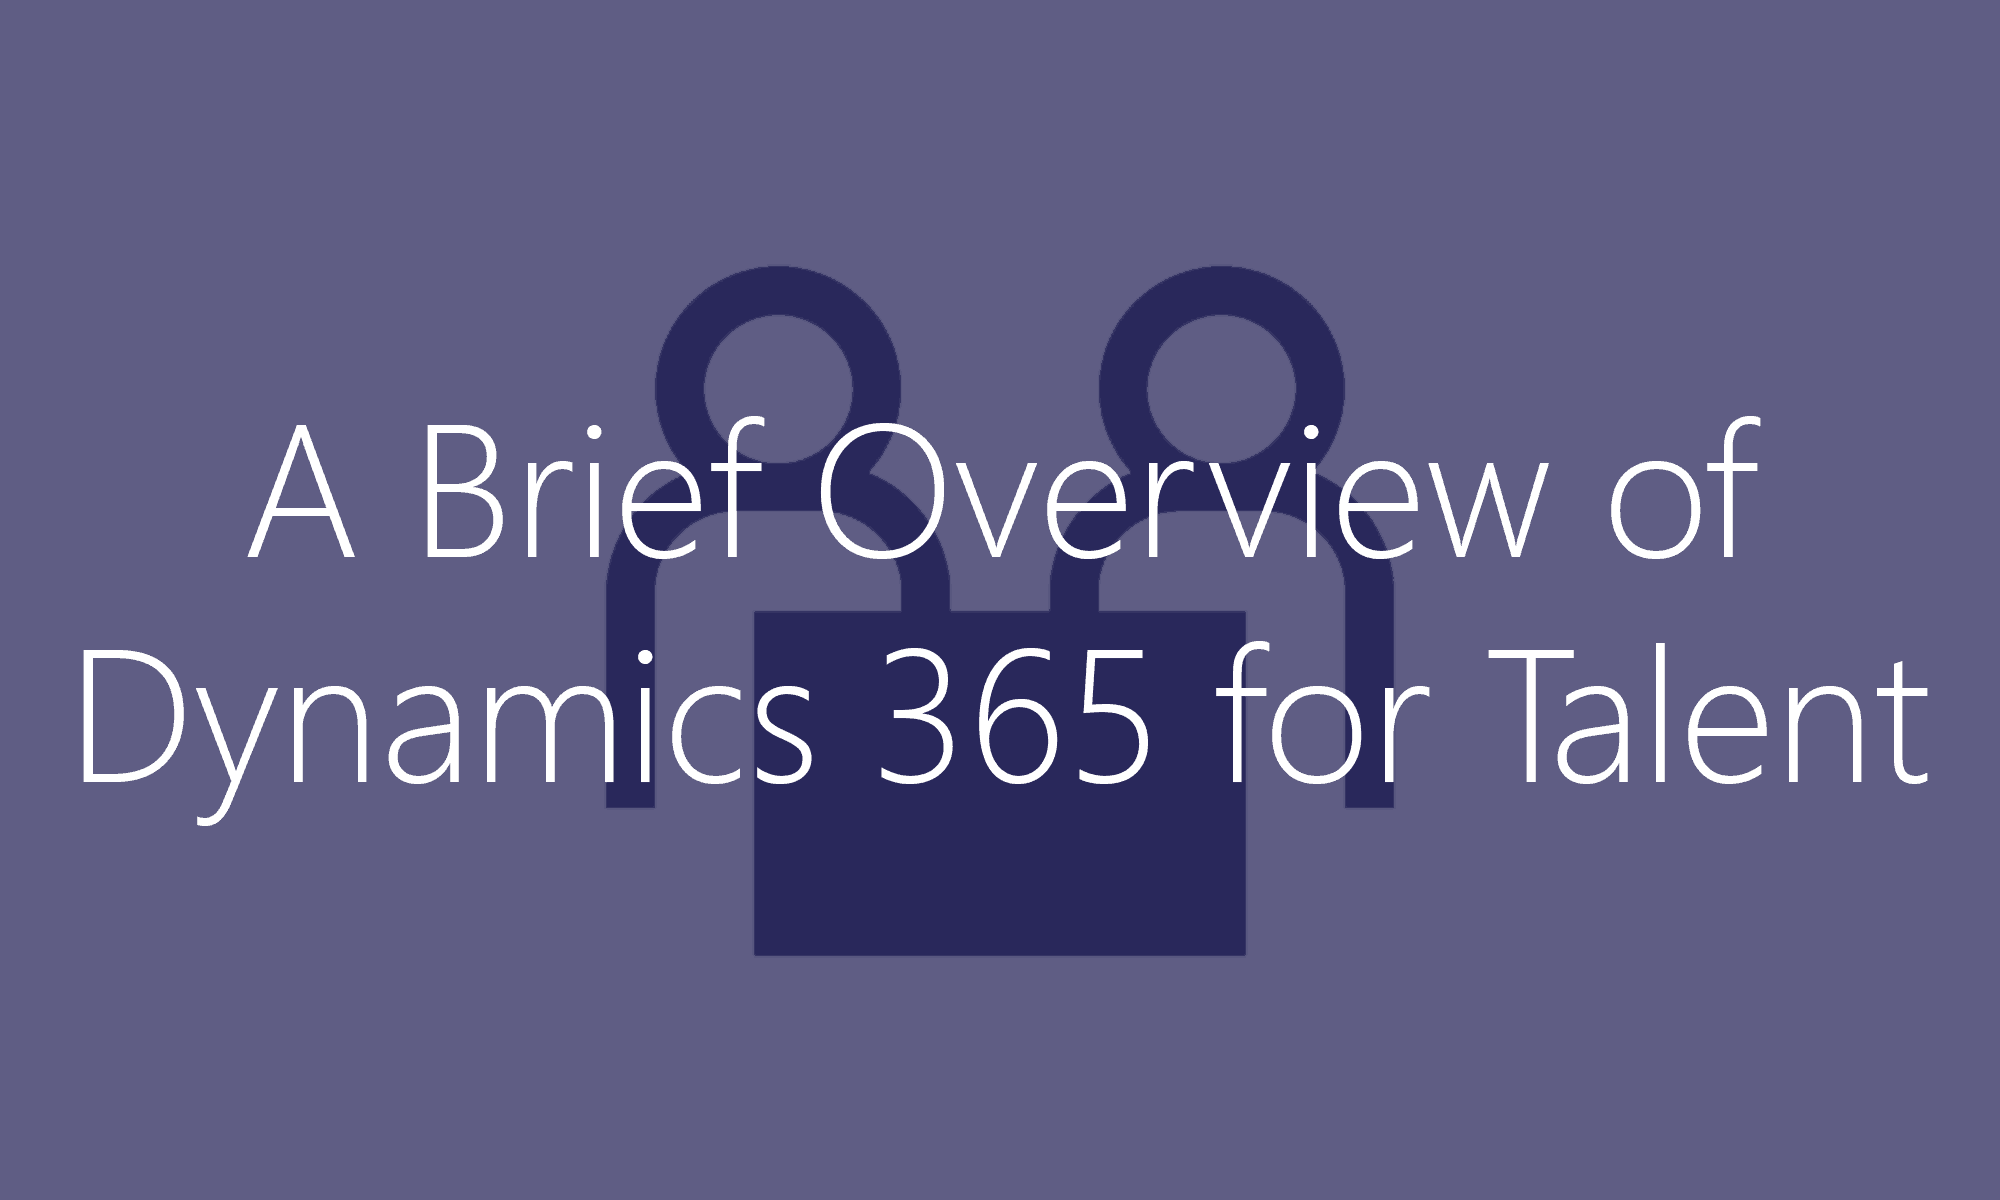 Overview of Dynamics 365 for Talent